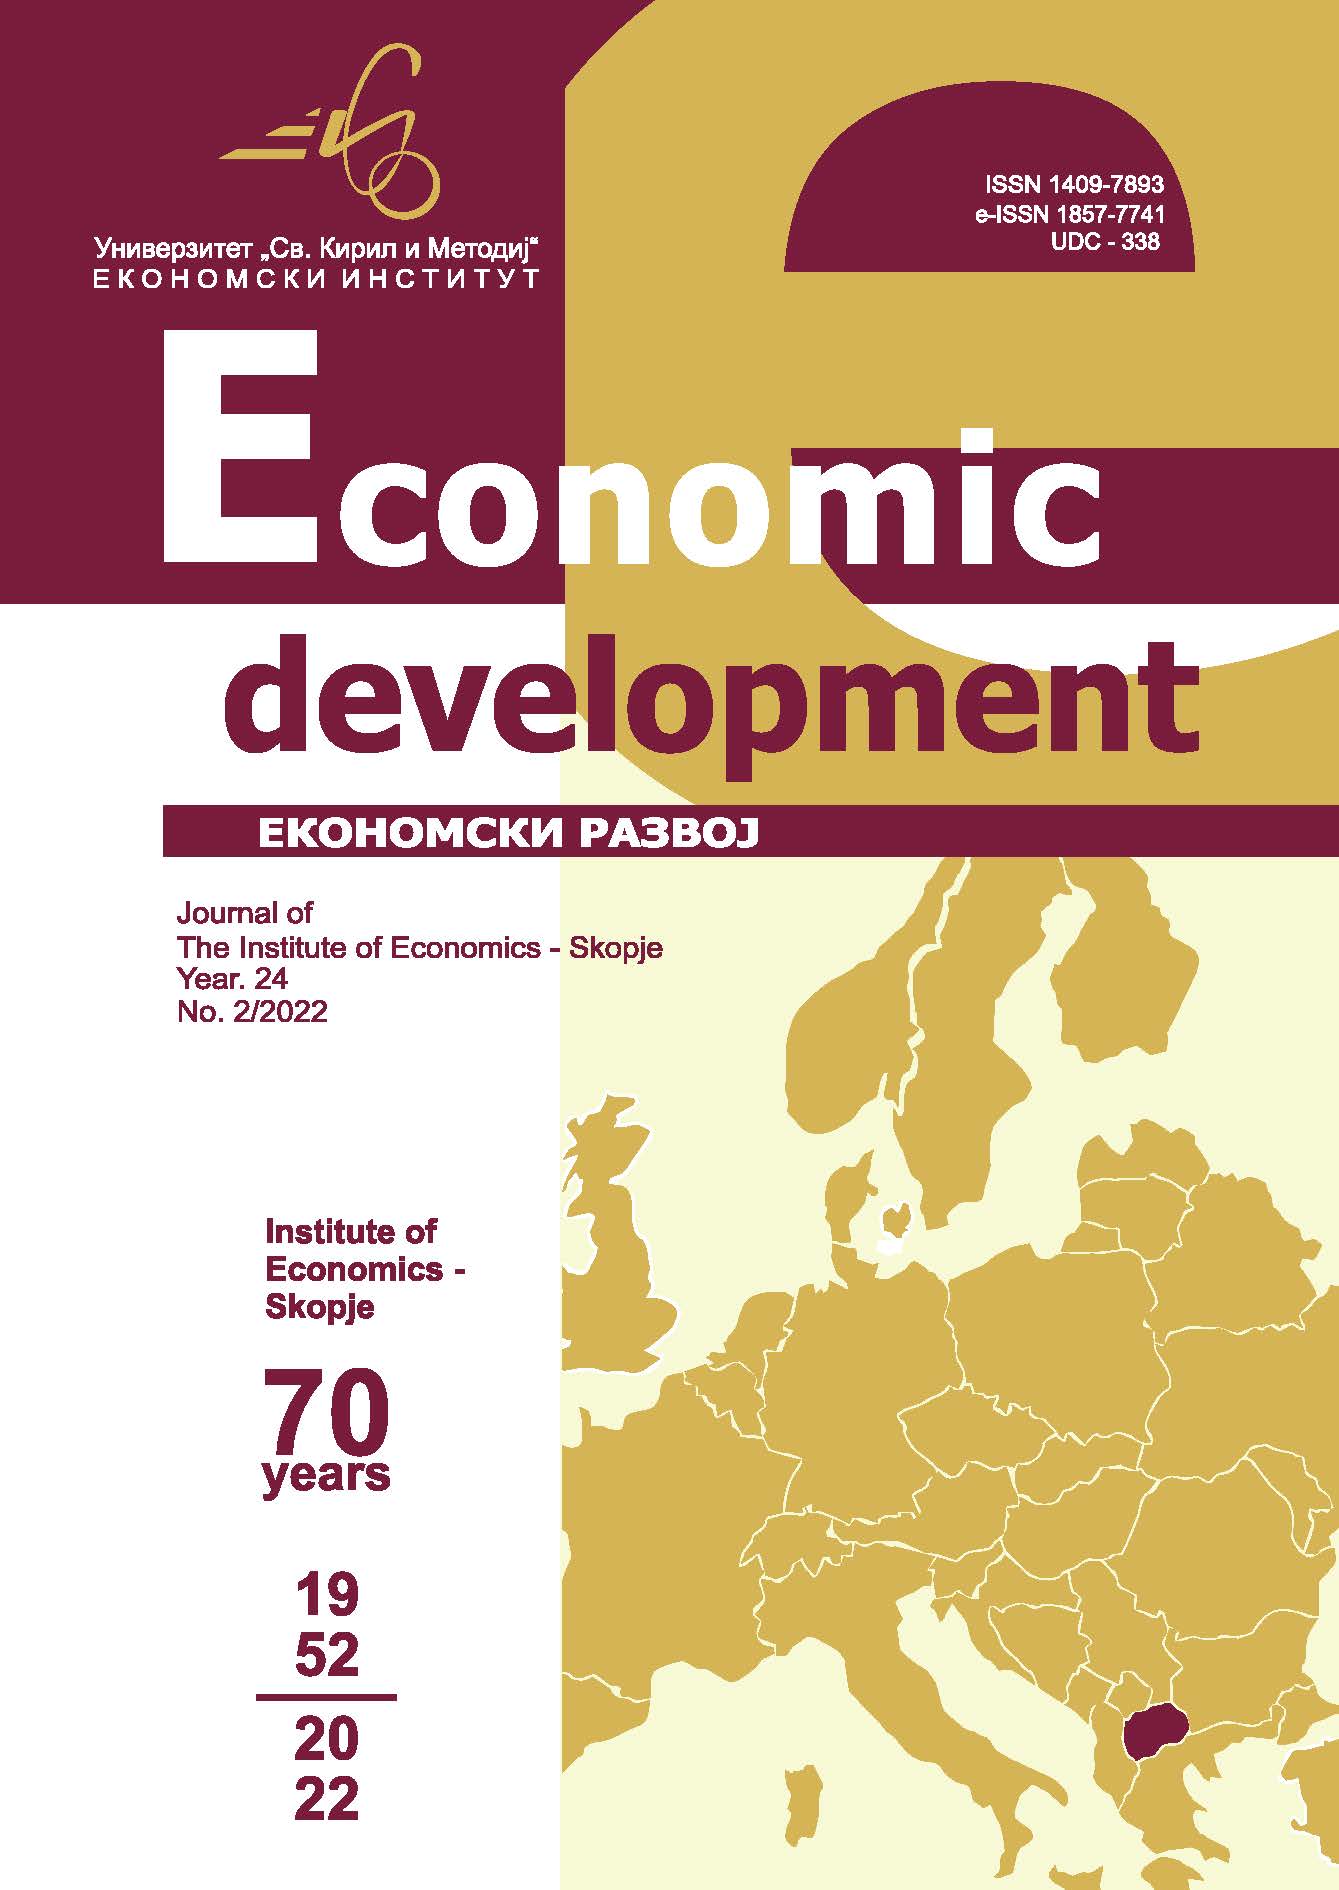 MACROECONOMIC ANALYSIS OF SOME INDICATORS OF MACEDONIAN ECONOMY IN THE PERIOD OF 2000-2020 Cover Image